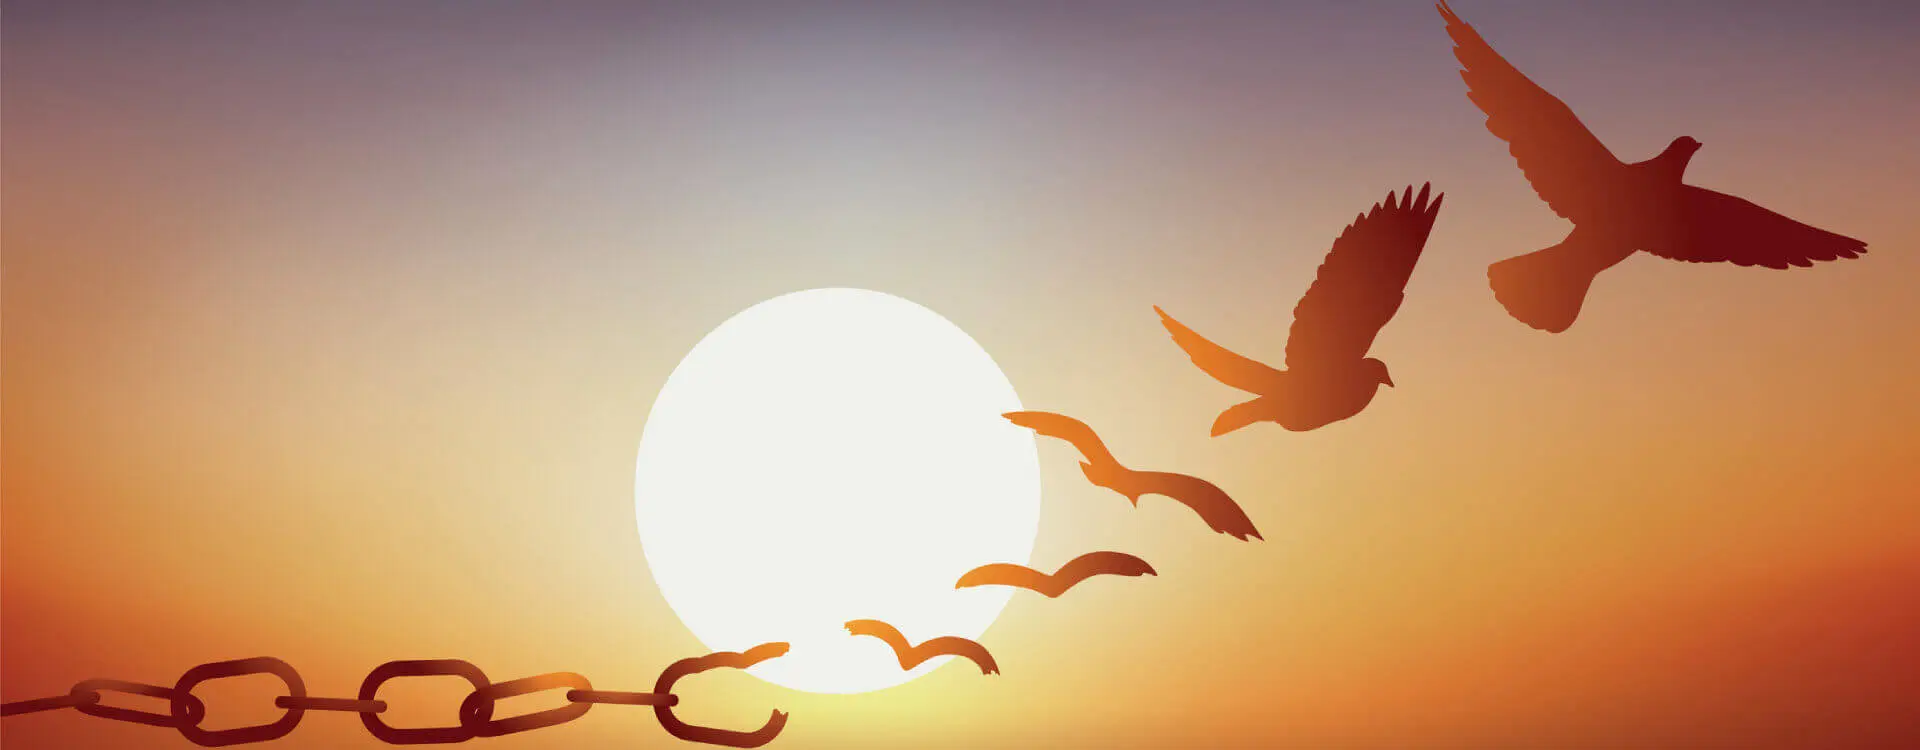 8 links of chain, the 8th chain is broken and the next animation is a bird. There are 5 versions of the bird, each one gets more detailed than the next. There is a bright yellow round sun in the background with an orange gradient background as the sky.